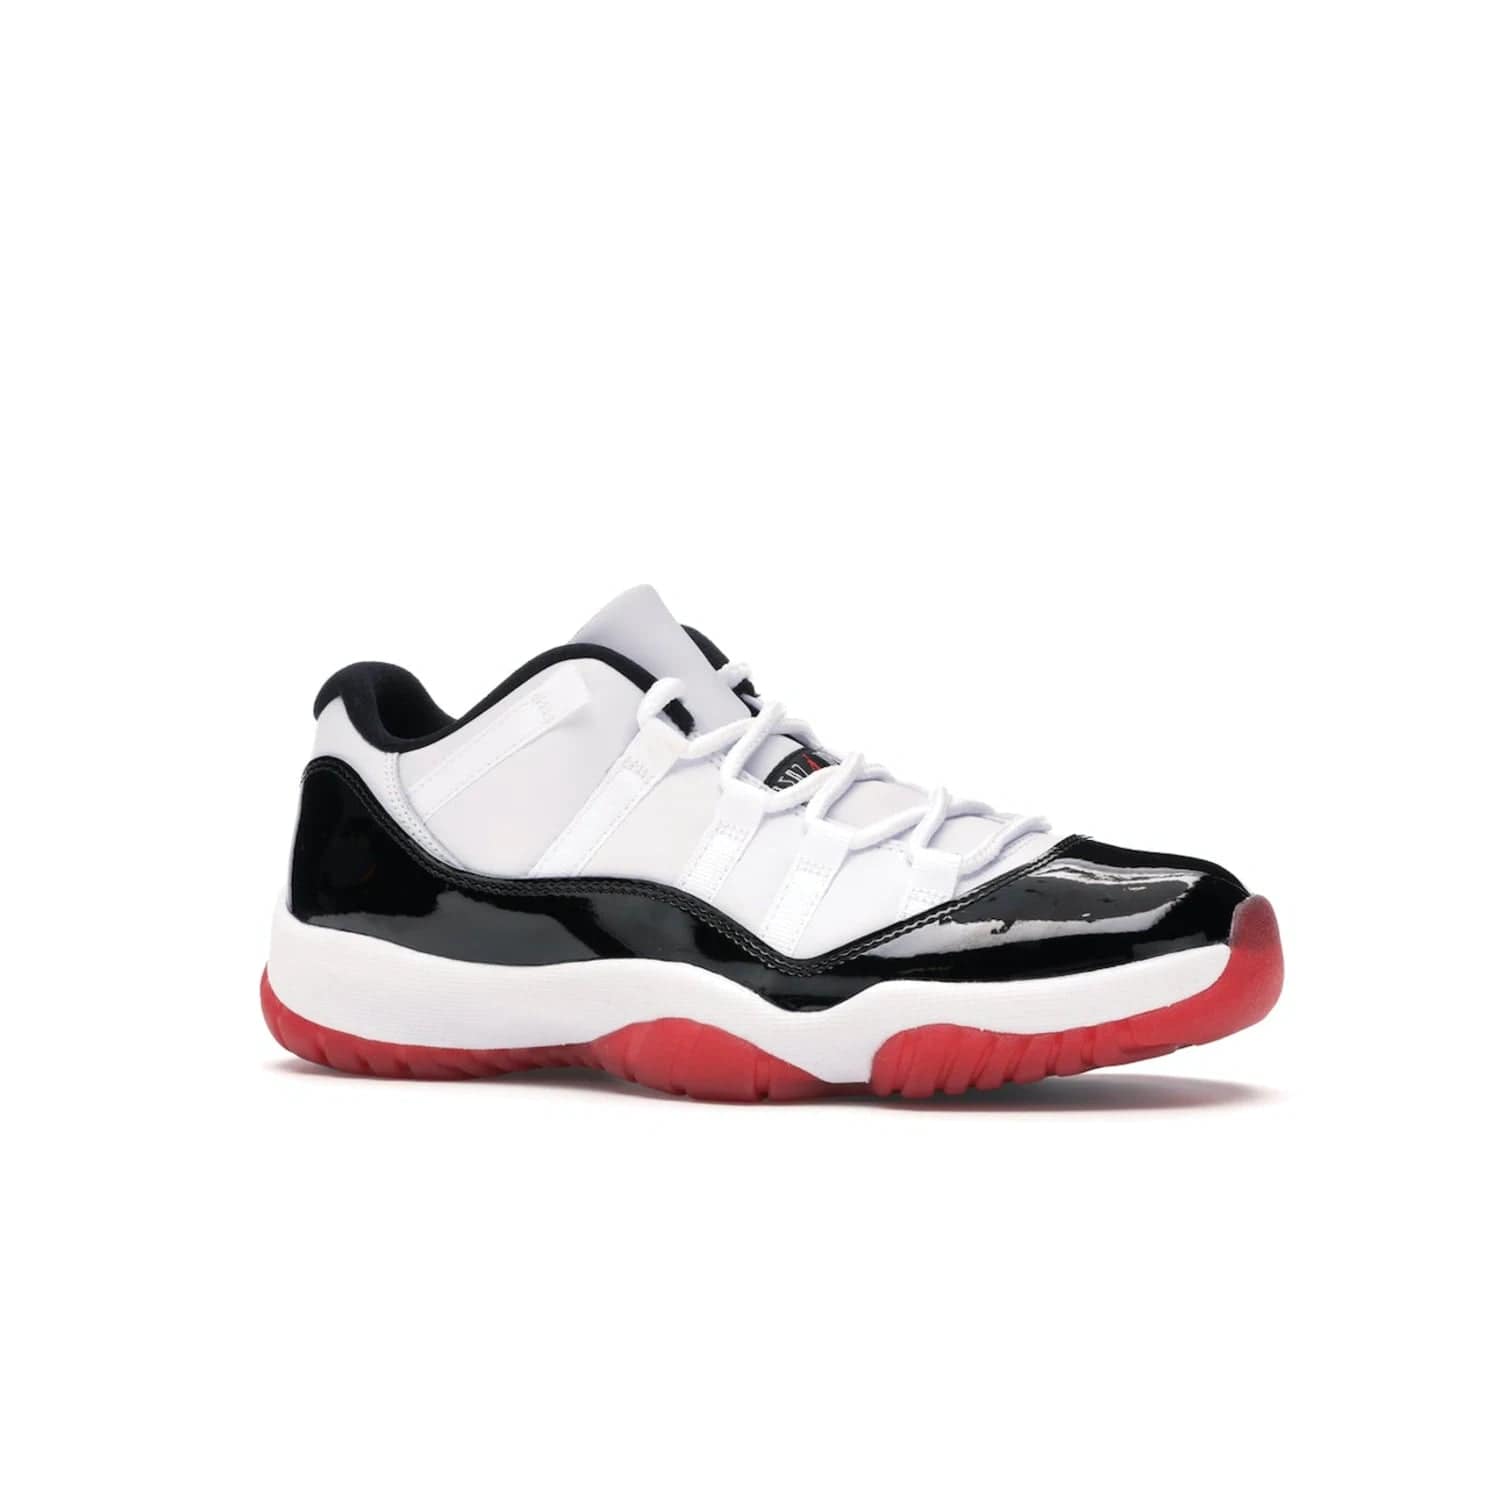 Jordan 11 Retro Low Concord Bred - Image 3 - Only at www.BallersClubKickz.com - Grab the classic Jordan 11 look with the Jordan 11 Retro Low Concord Bred. With white and black elements and the iconic red outsole of the Jordan 11 Bred, you won't miss a beat. Released in June 2020, the perfect complement to any outfit.